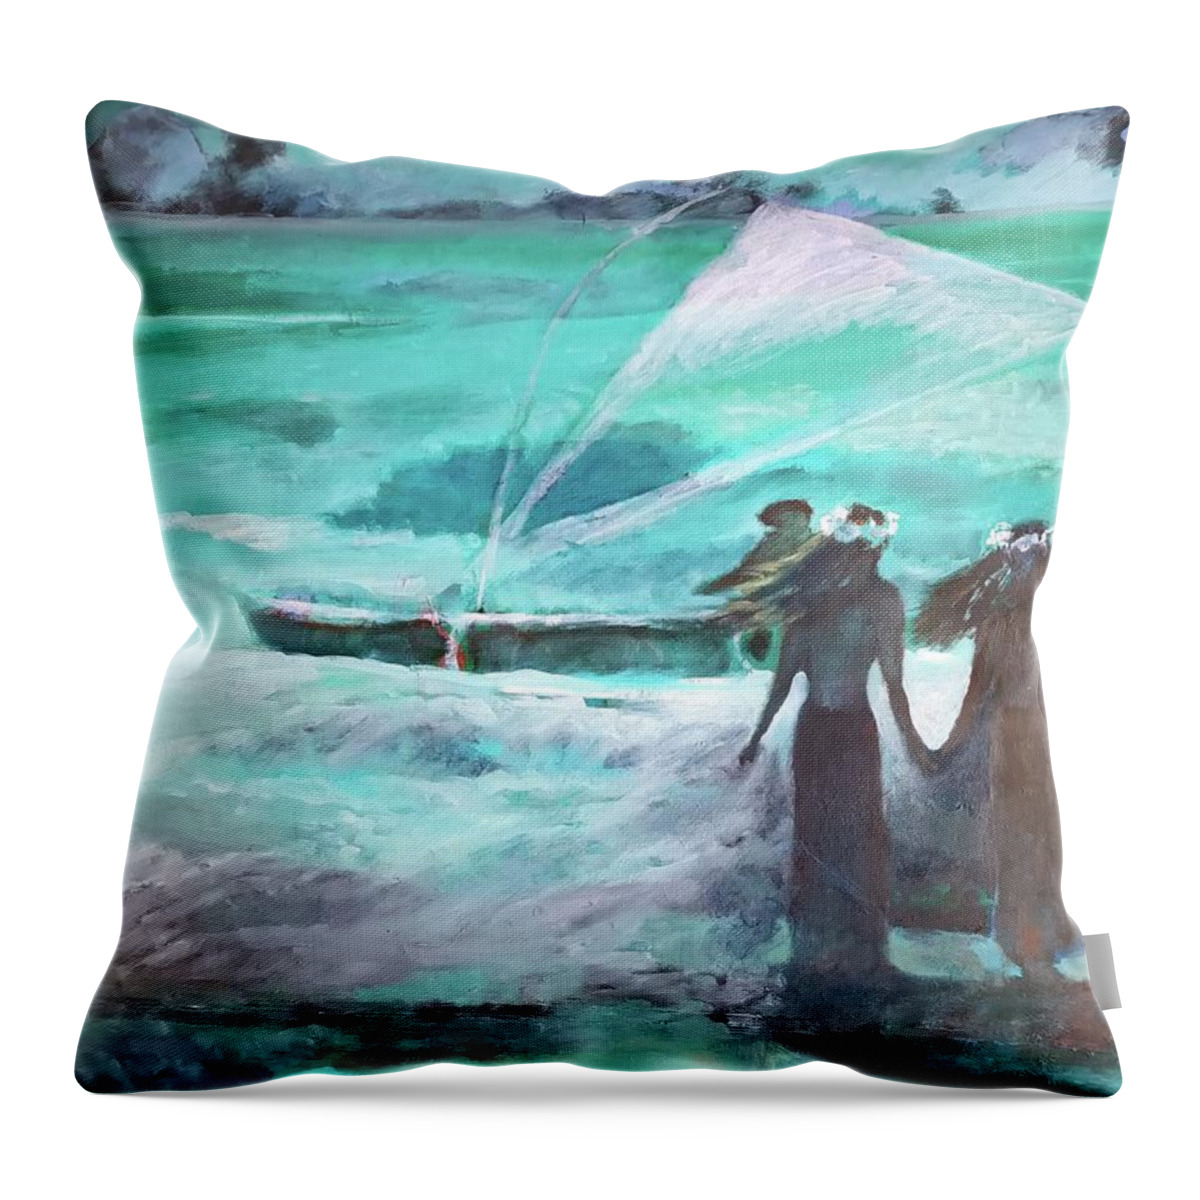 Hawaii Throw Pillow featuring the painting Vento Alle Hawaii by Enrico Garff